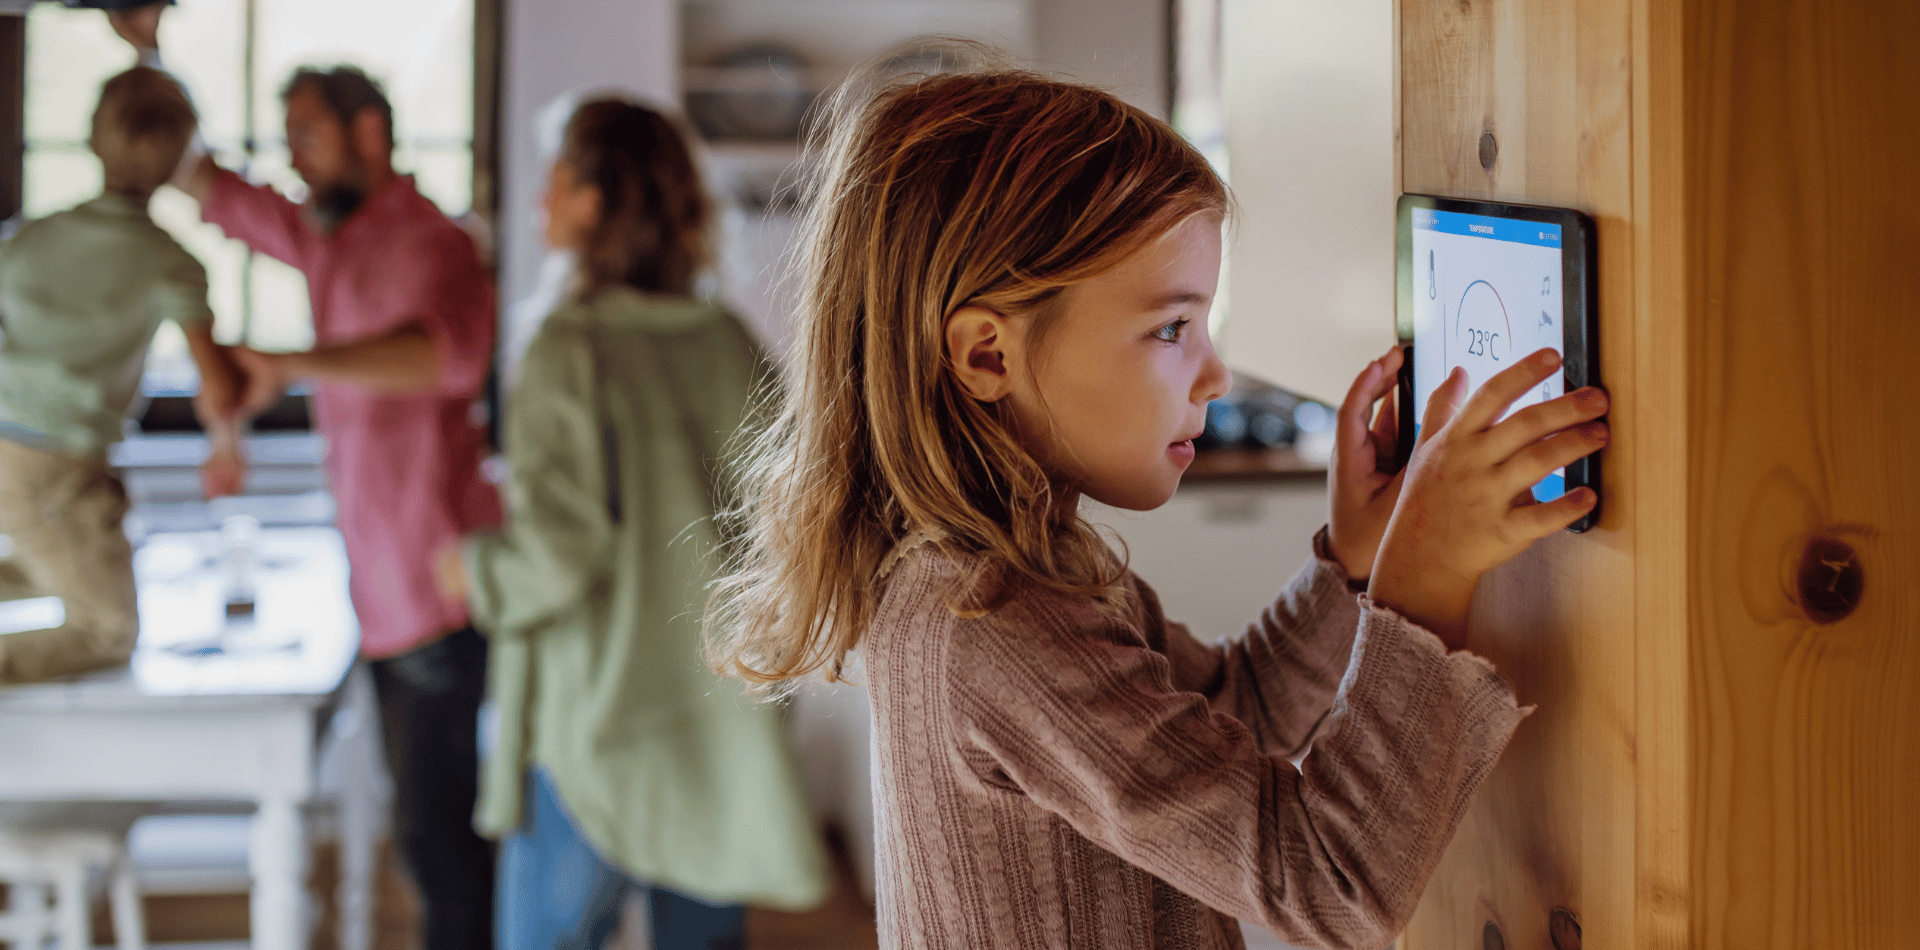 A child using a smart thermostat